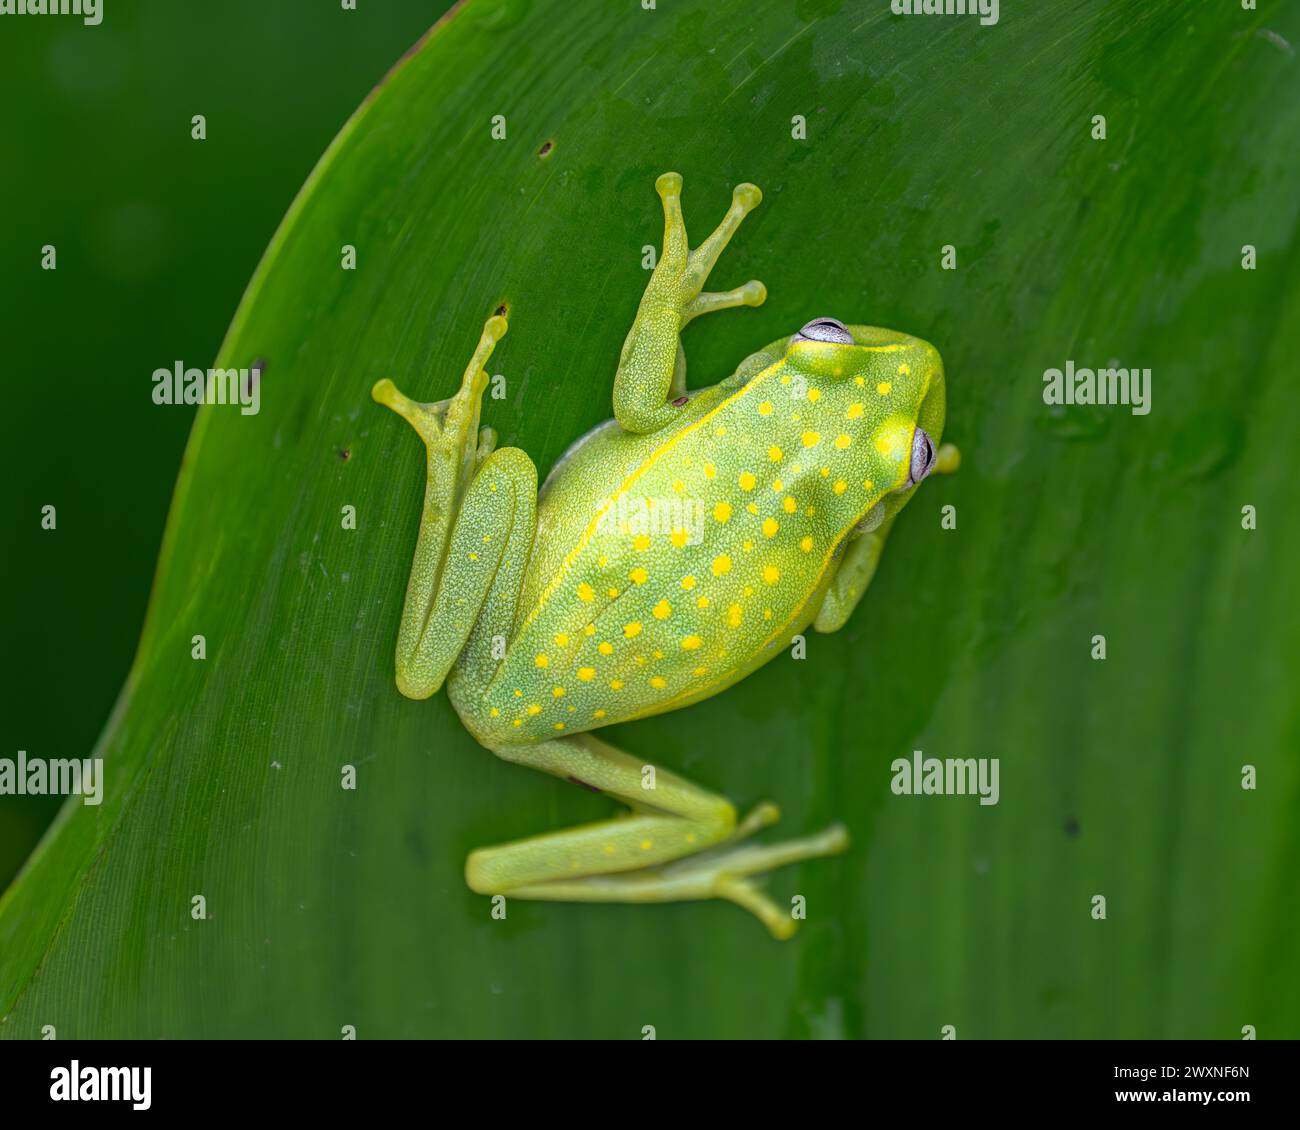 A closeup shot of a spotted boophis frog on a leaf Stock Photo